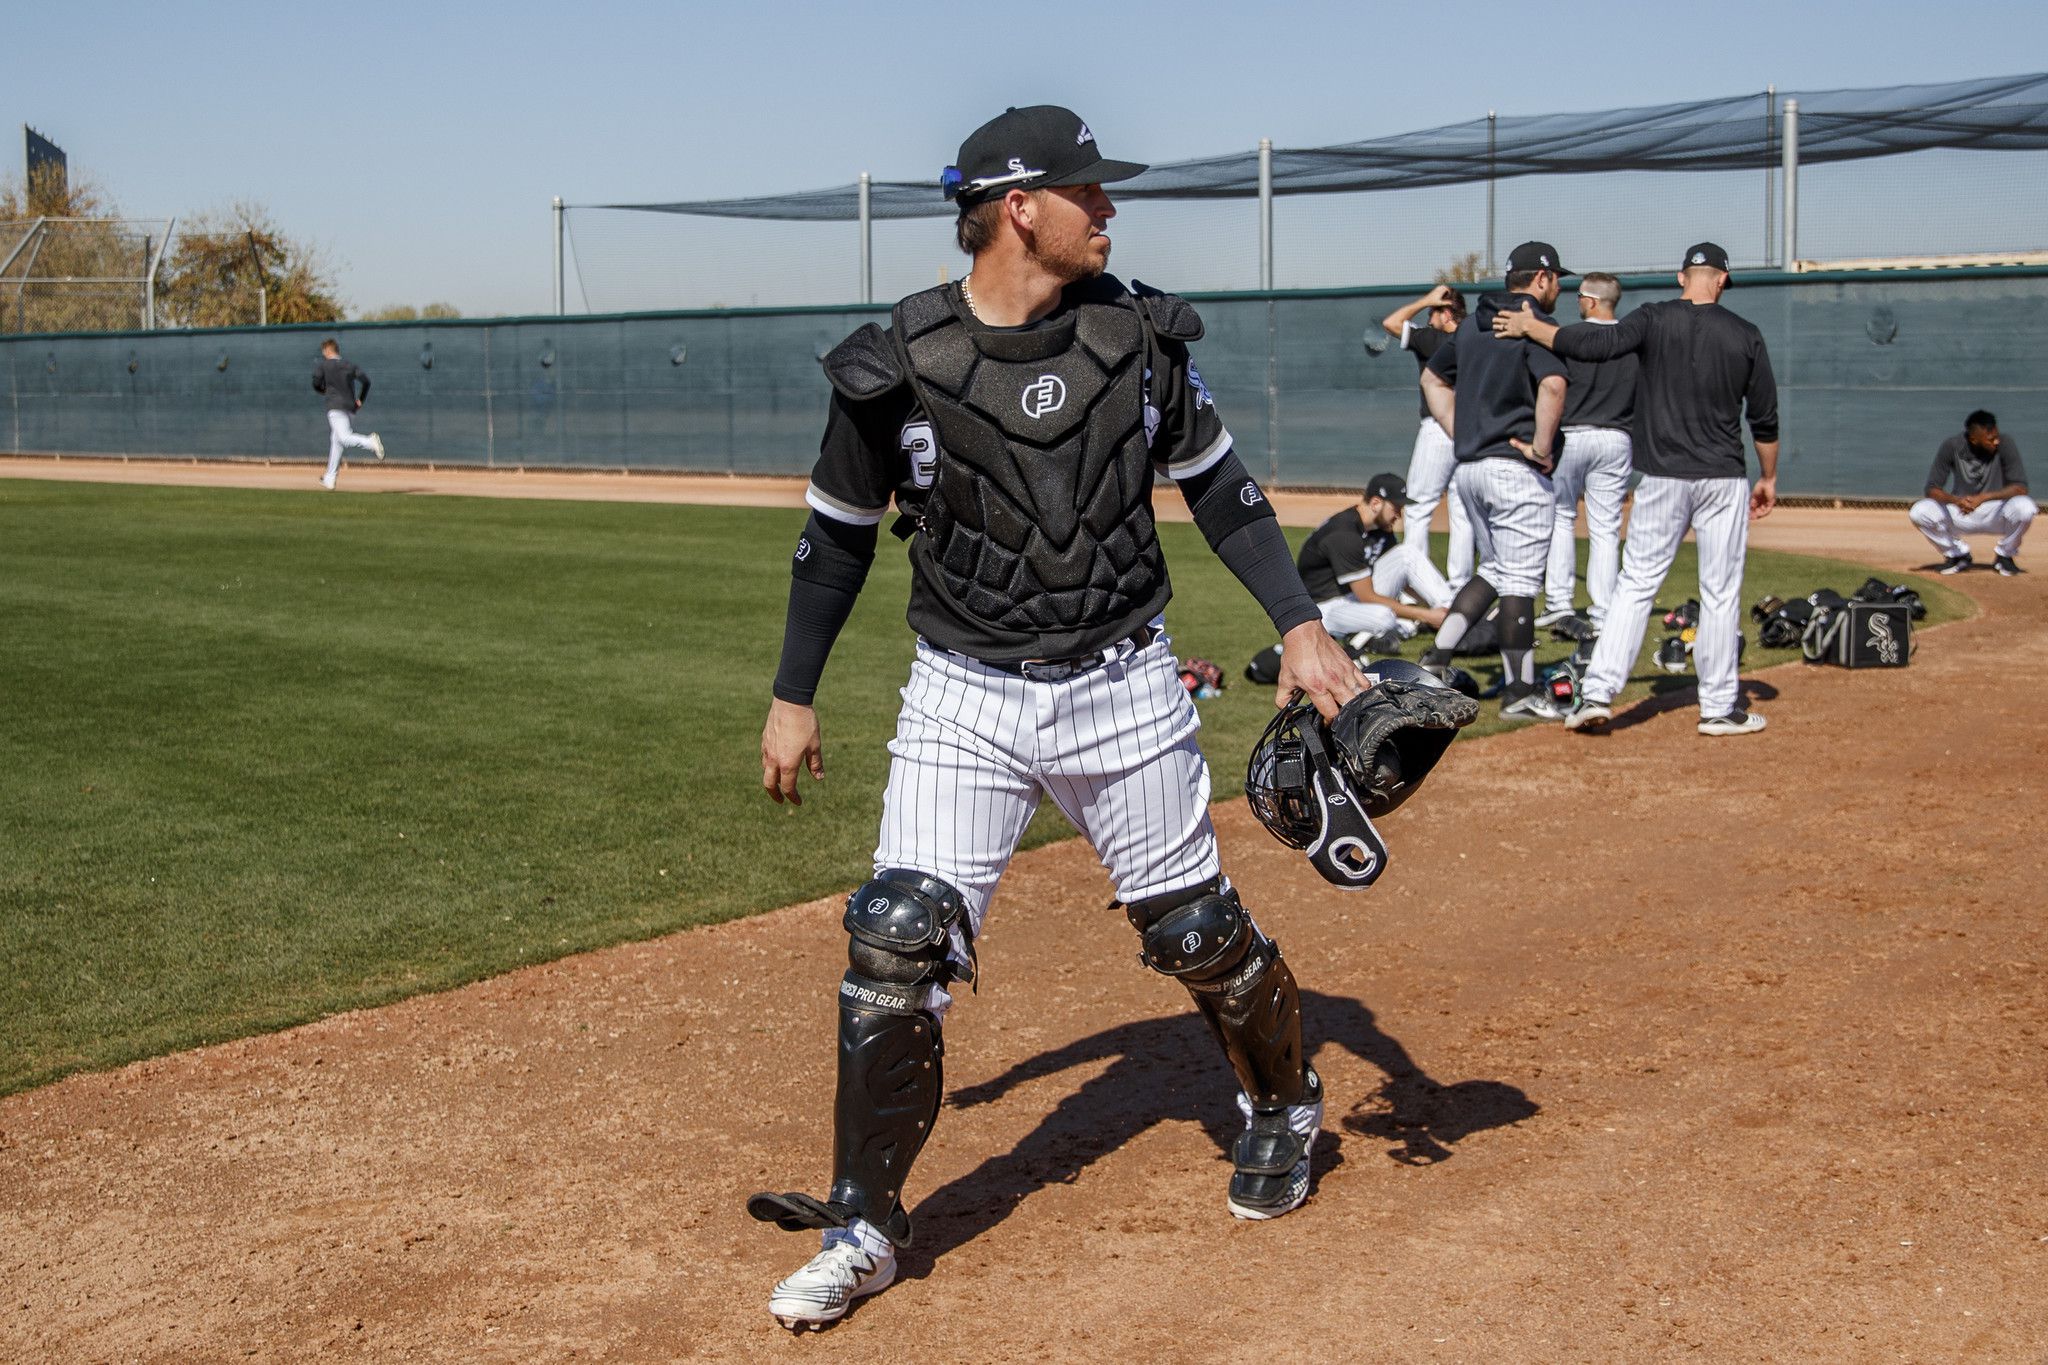 All-Star catcher Yasmani Grandal on the White Sox: “They have